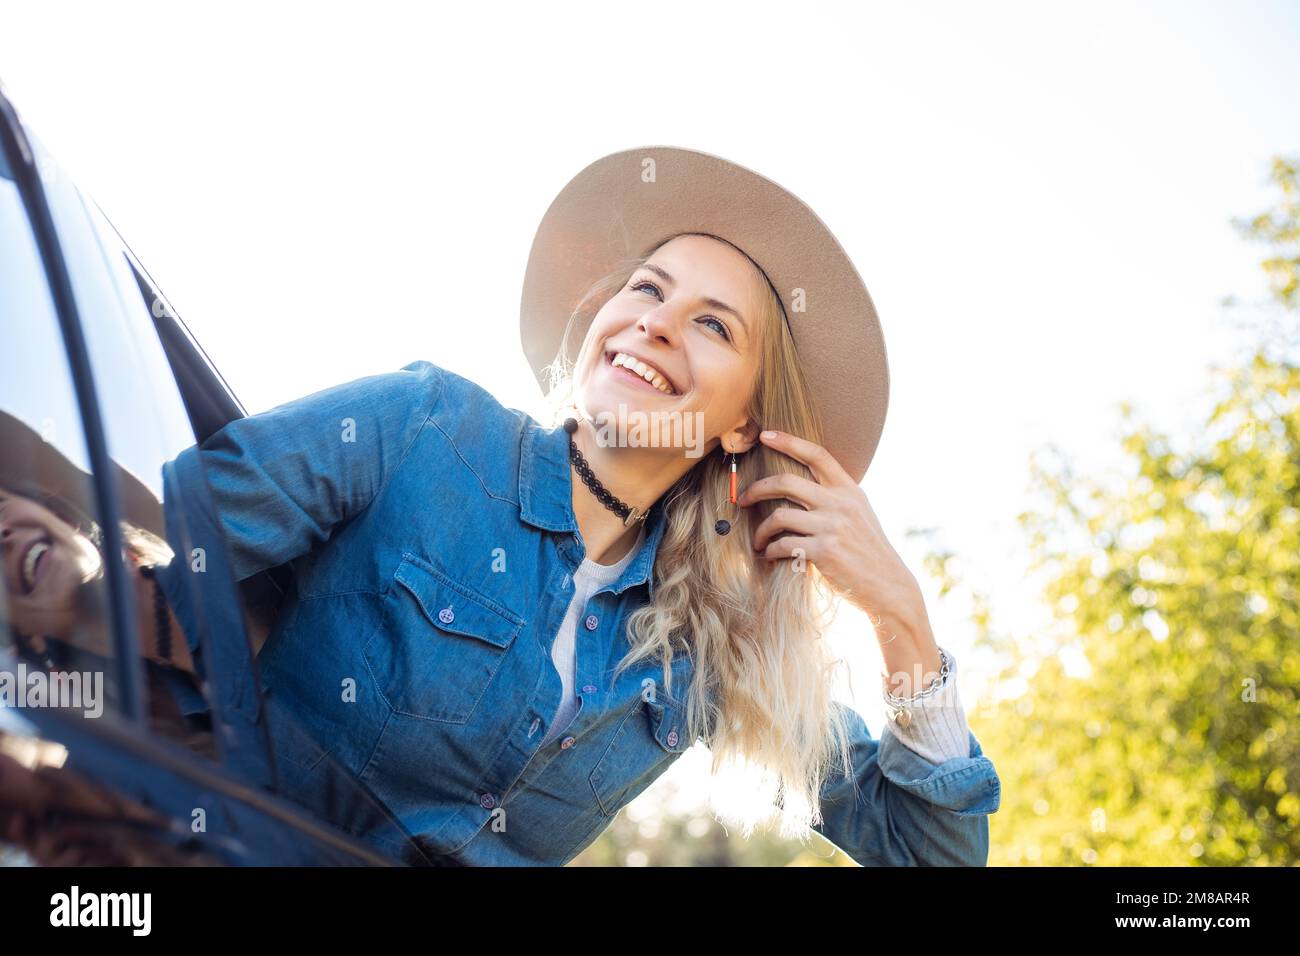 Laughing merry glad pensive blond woman in hat, jeans shirt lean out of car, joy fresh air. Carpool, rental for holiday Stock Photo